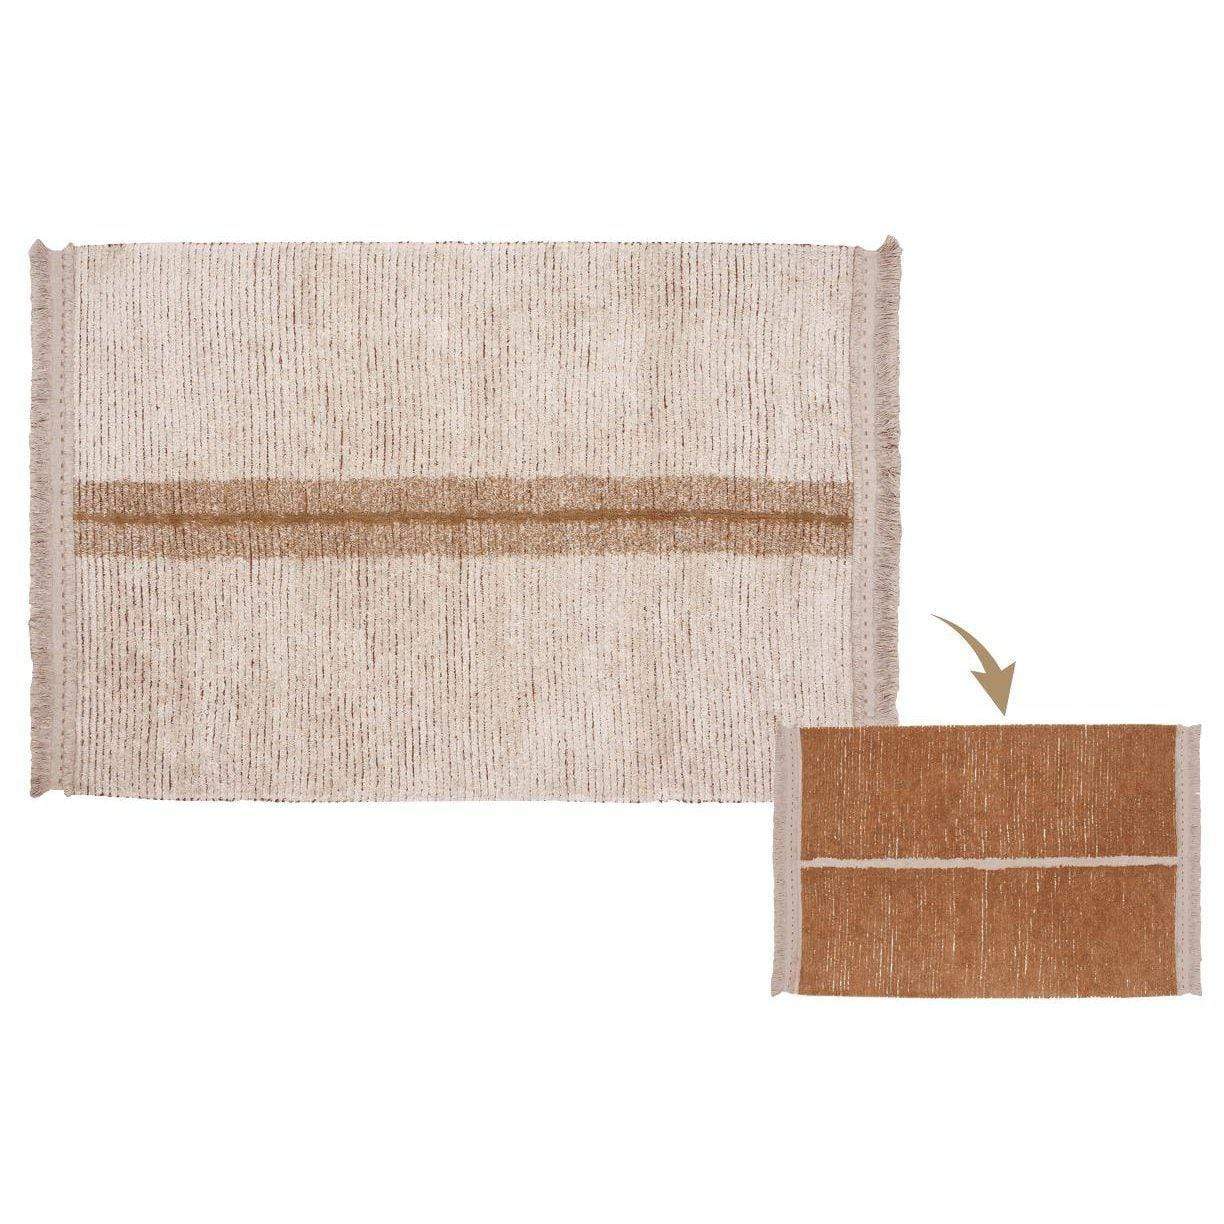 Rugs by Roo | Lorena Canals Reversible Washable Rug Duetto Toffee